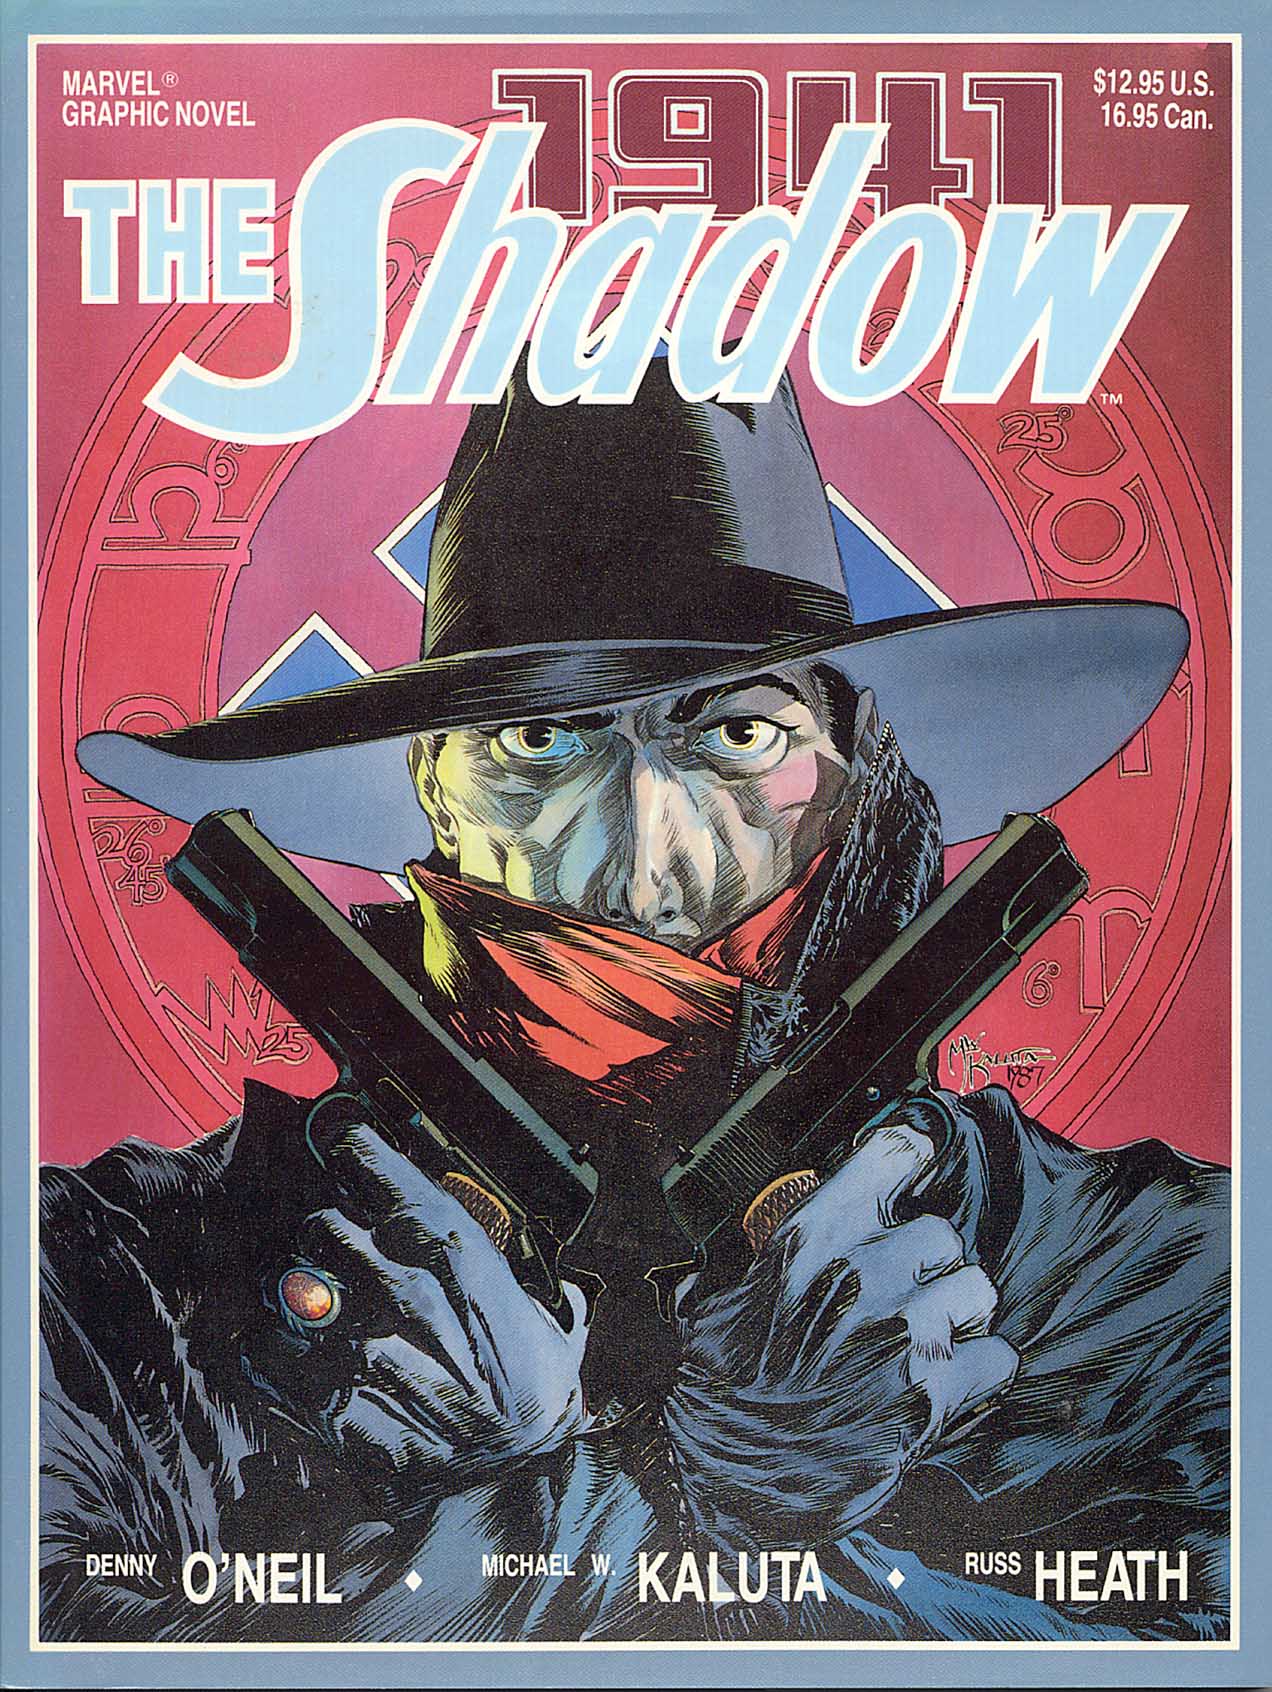 Read online Marvel Graphic Novel comic -  Issue #34 - The Shadow - Hitler's Astrologer - 1